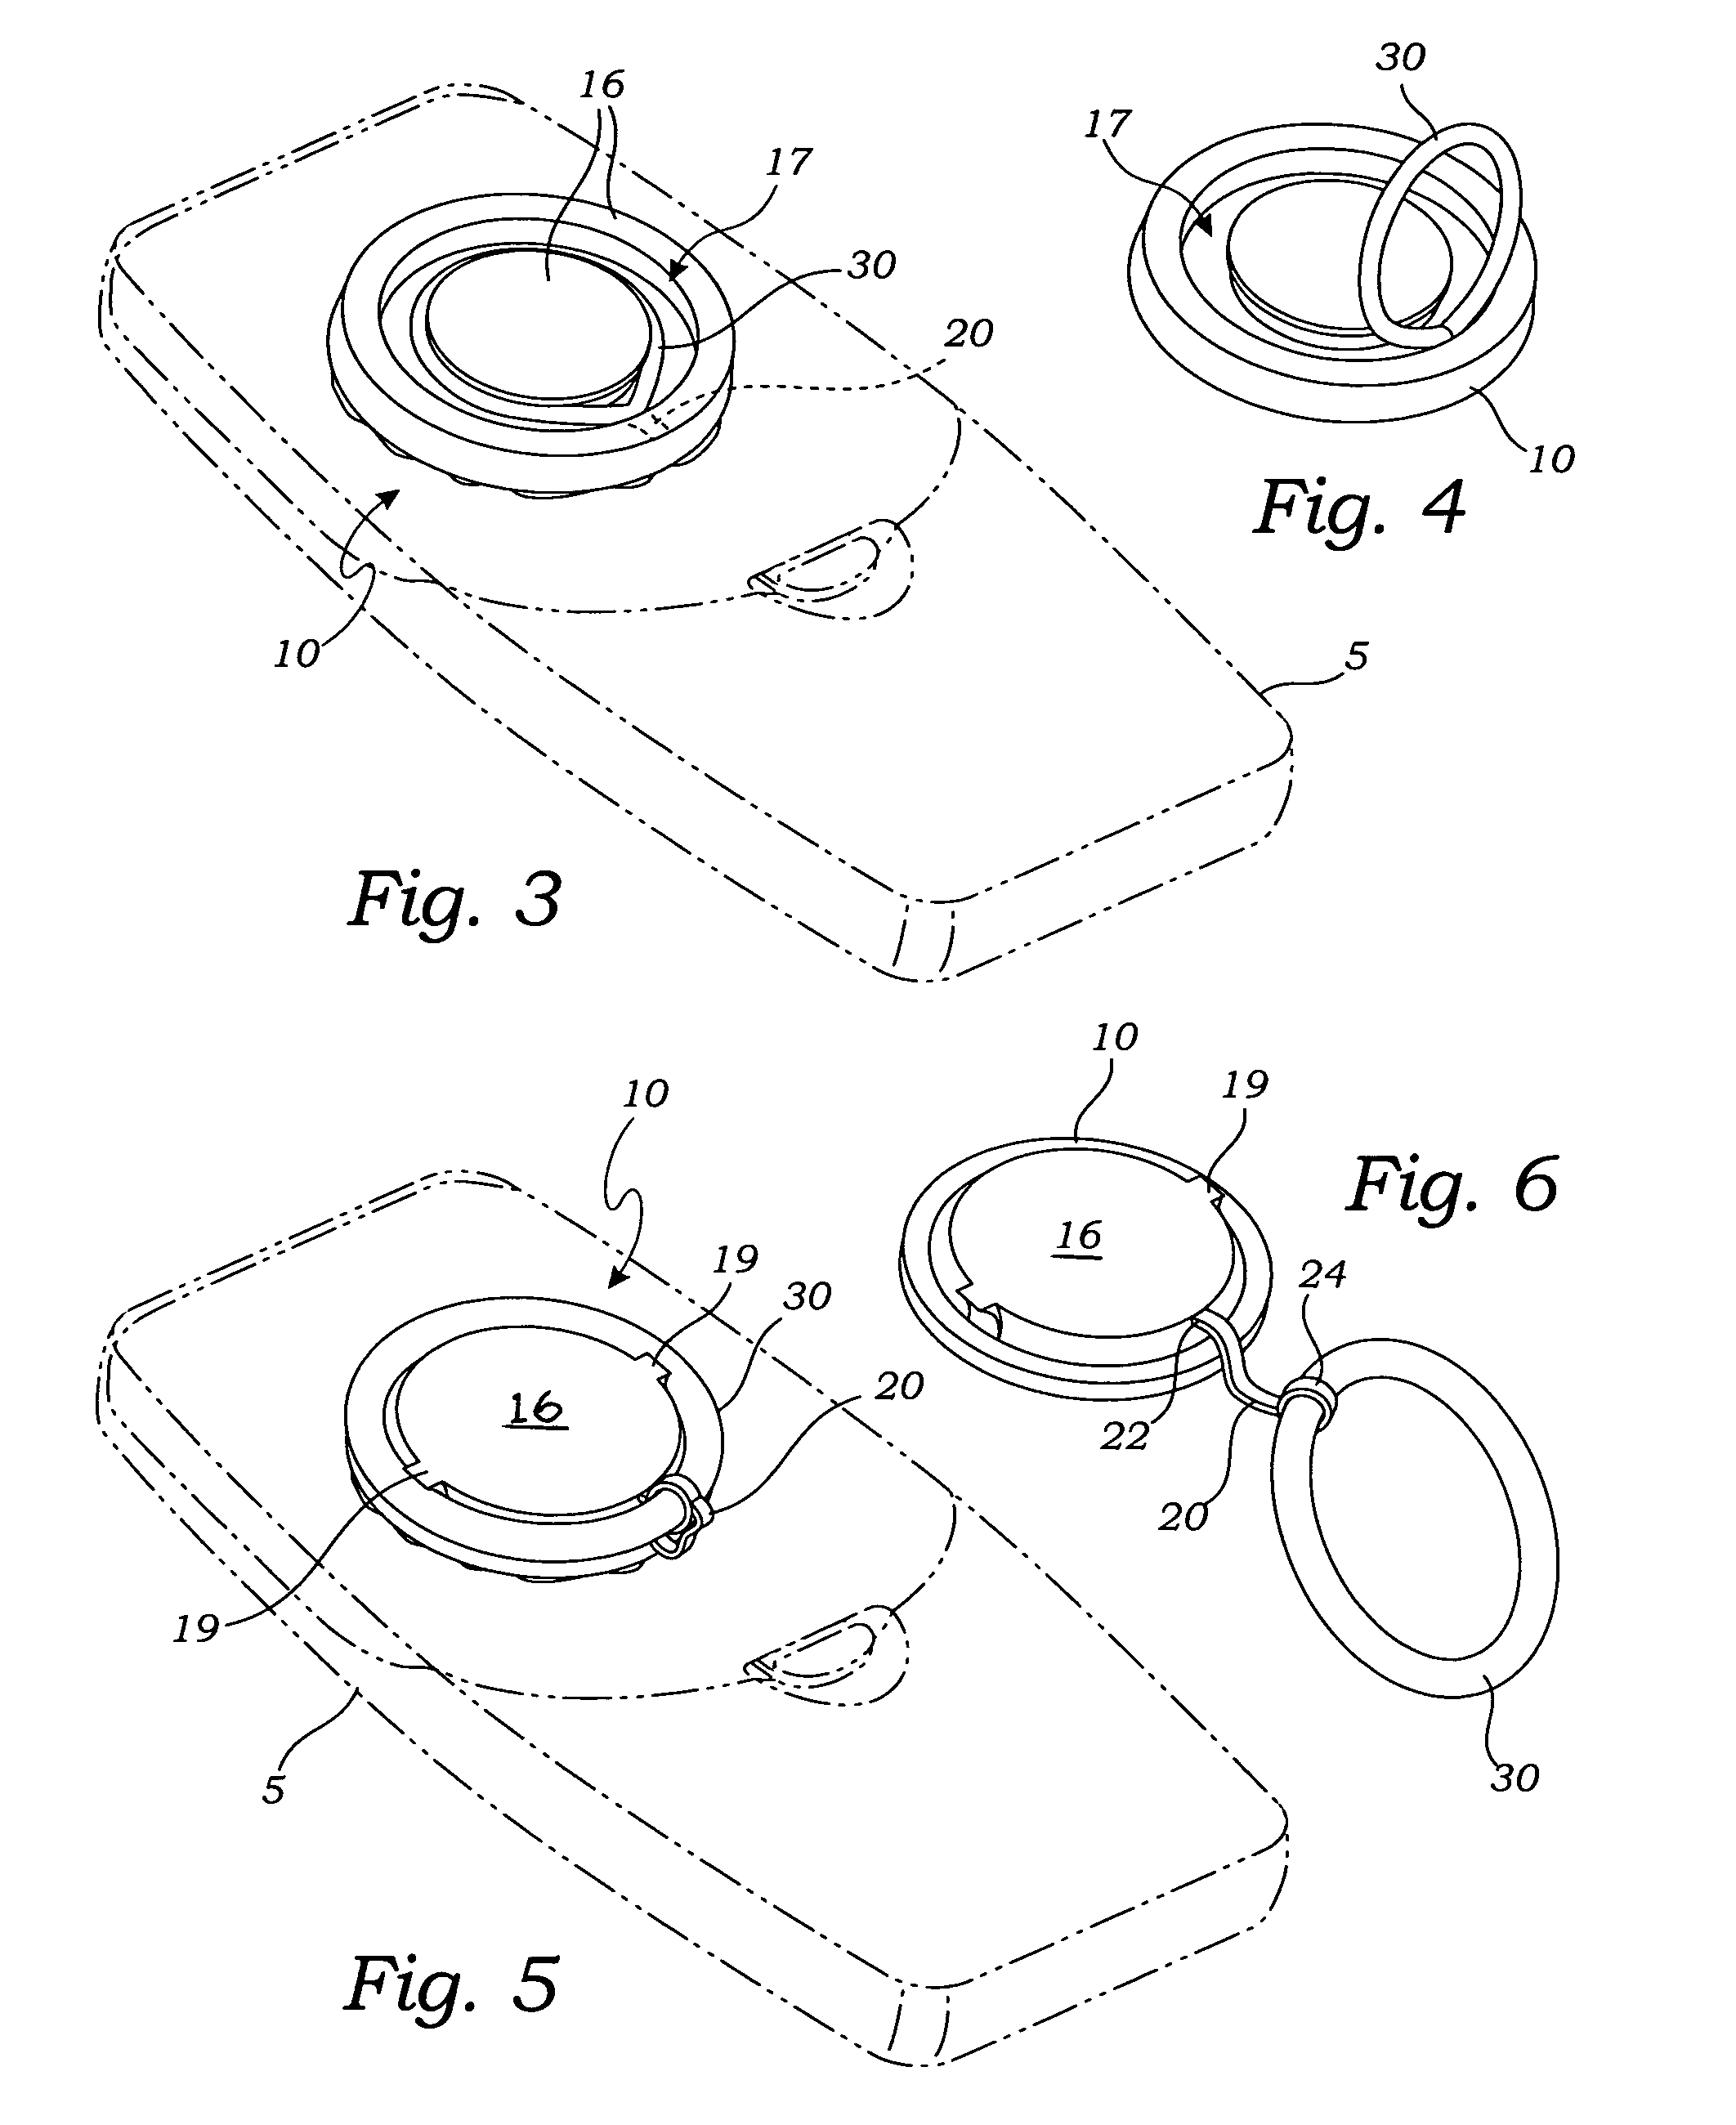 Stick-on security ring for a hand held device